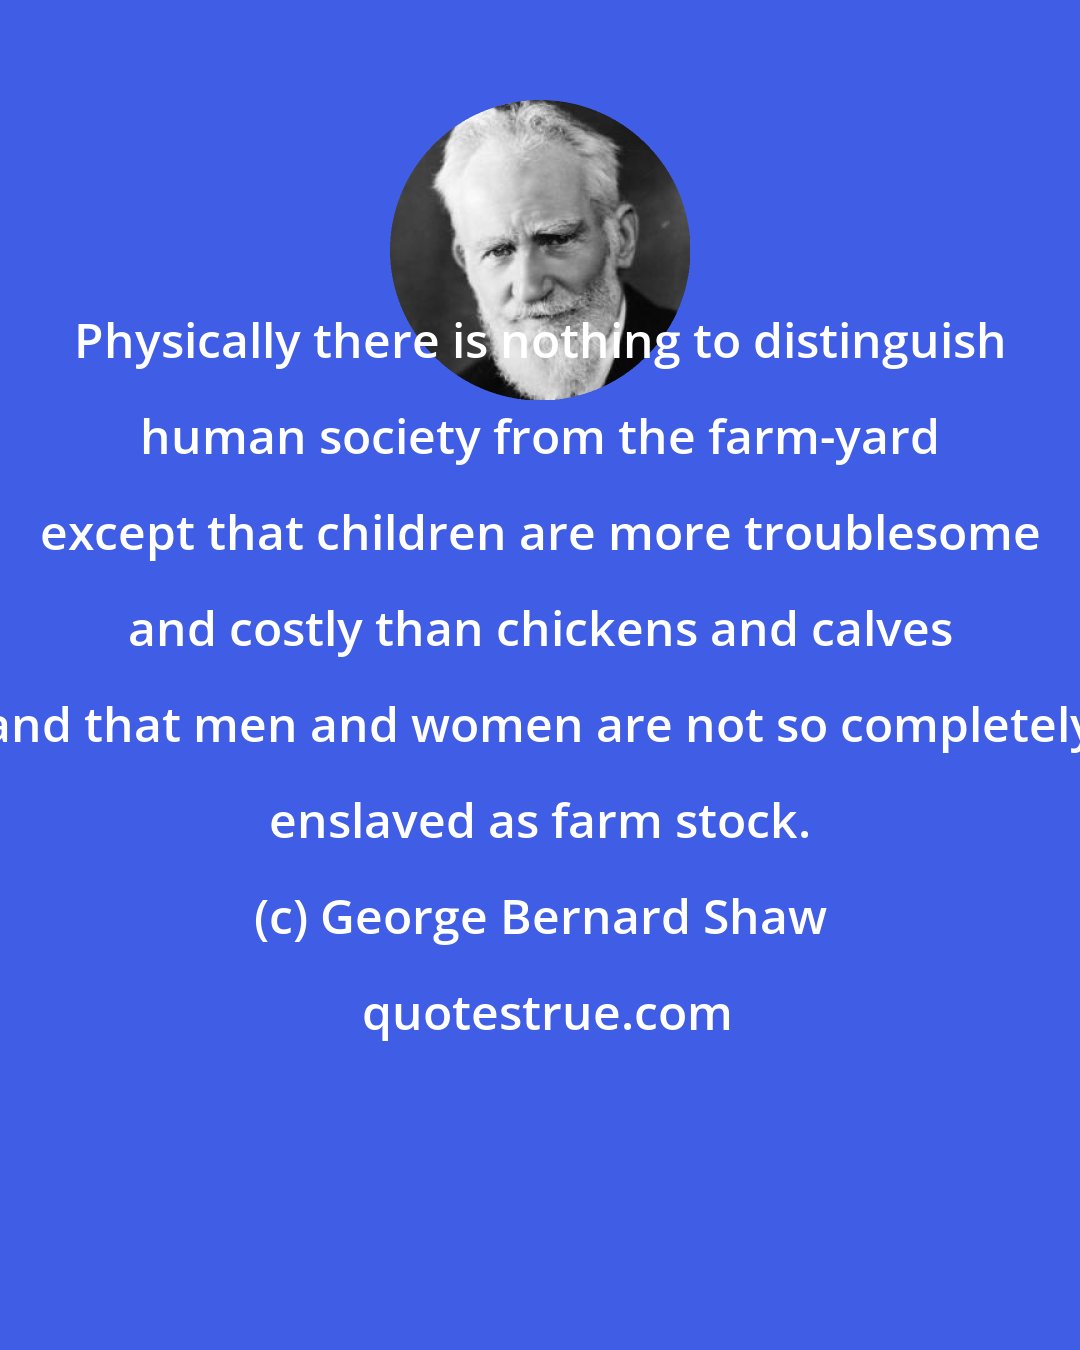 George Bernard Shaw: Physically there is nothing to distinguish human society from the farm-yard except that children are more troublesome and costly than chickens and calves and that men and women are not so completely enslaved as farm stock.